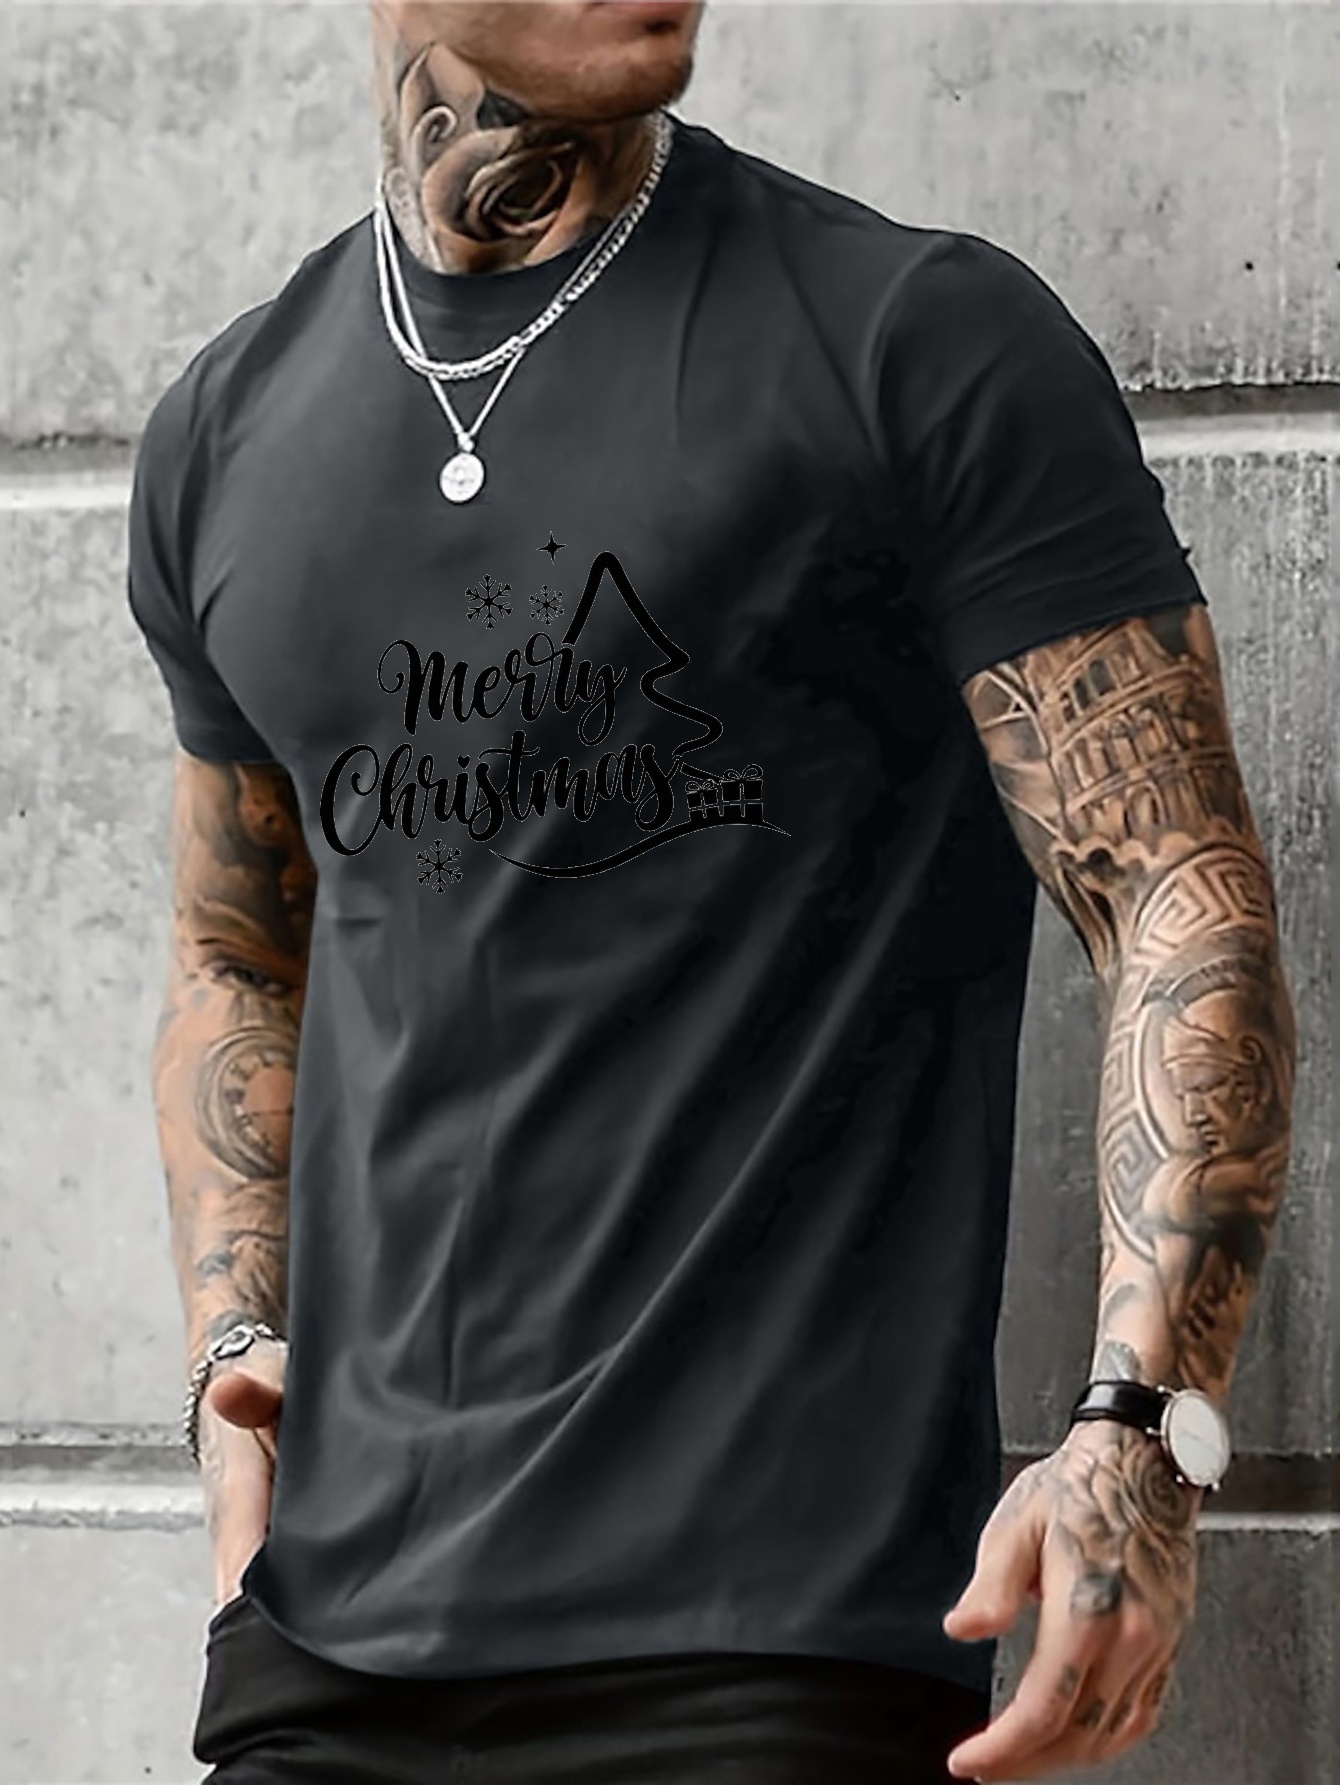 Mens Shirts Male Summer Casual Paper Plane Print T Shirt Blouse Short  Sleeve Round Neck Tops T Shirt flannel shirt for men